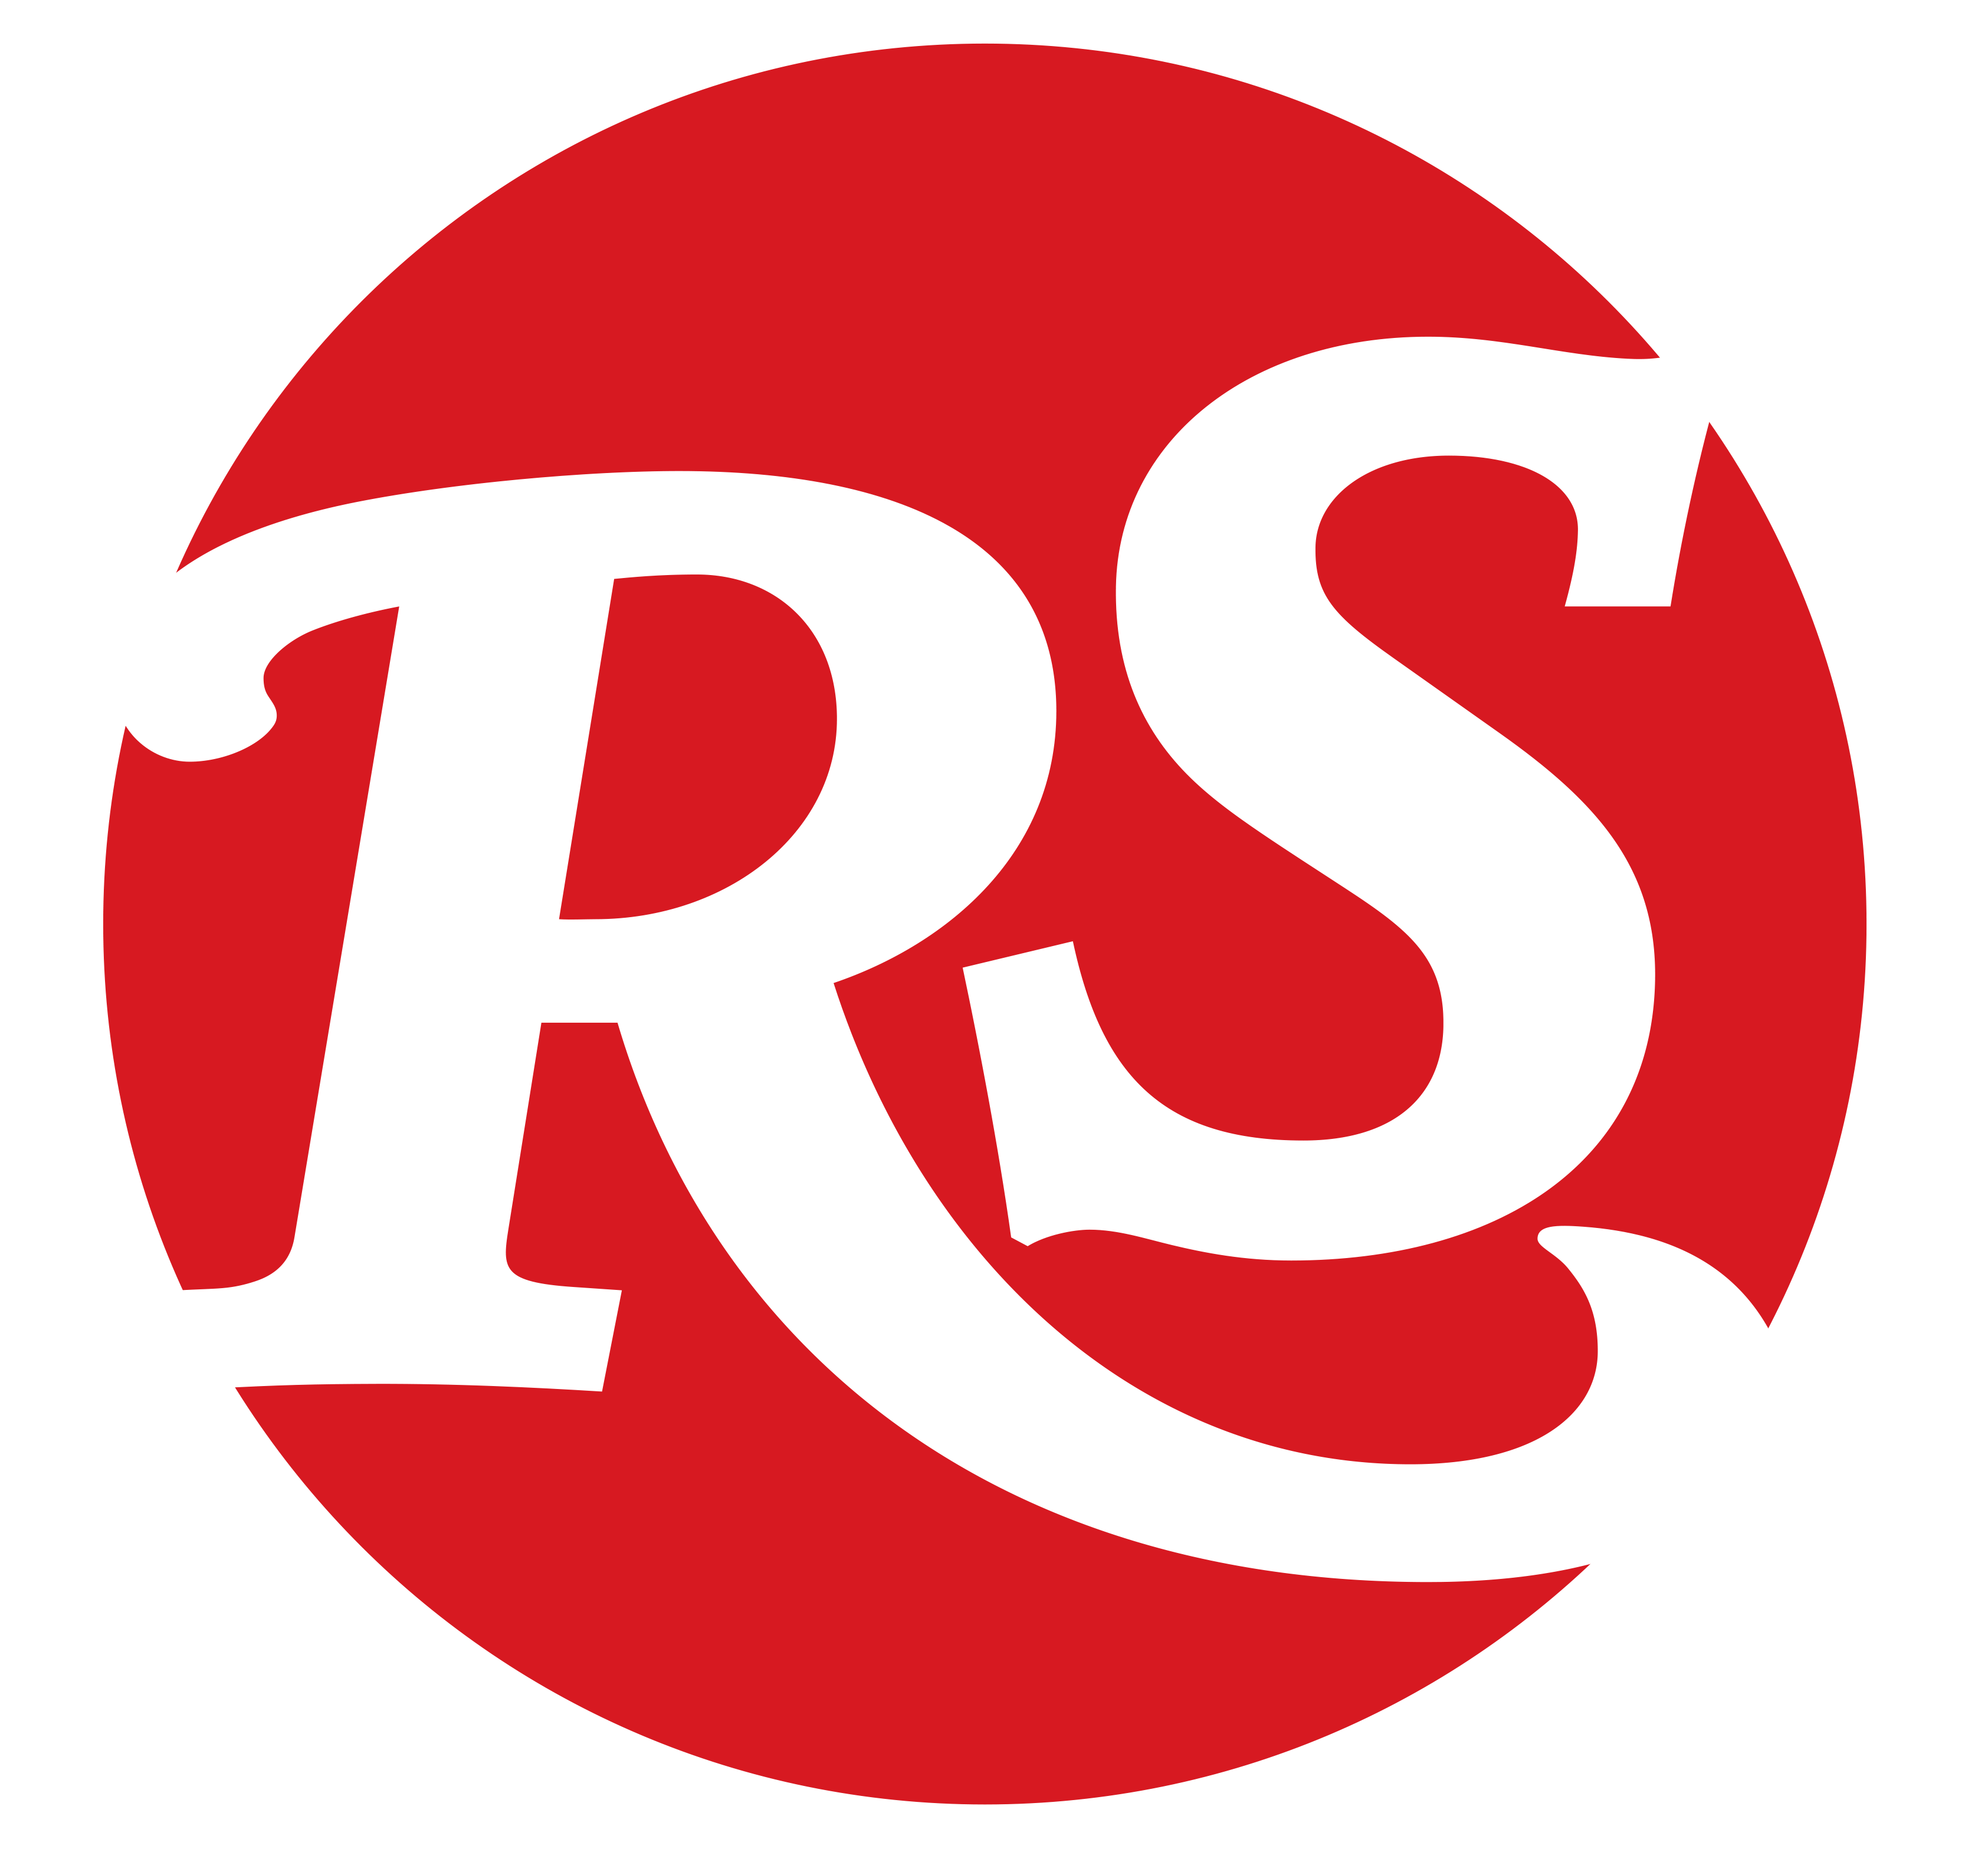 New Rolling Stone Logo - Rolling Stone Magazine Website Redesign, Relaunch